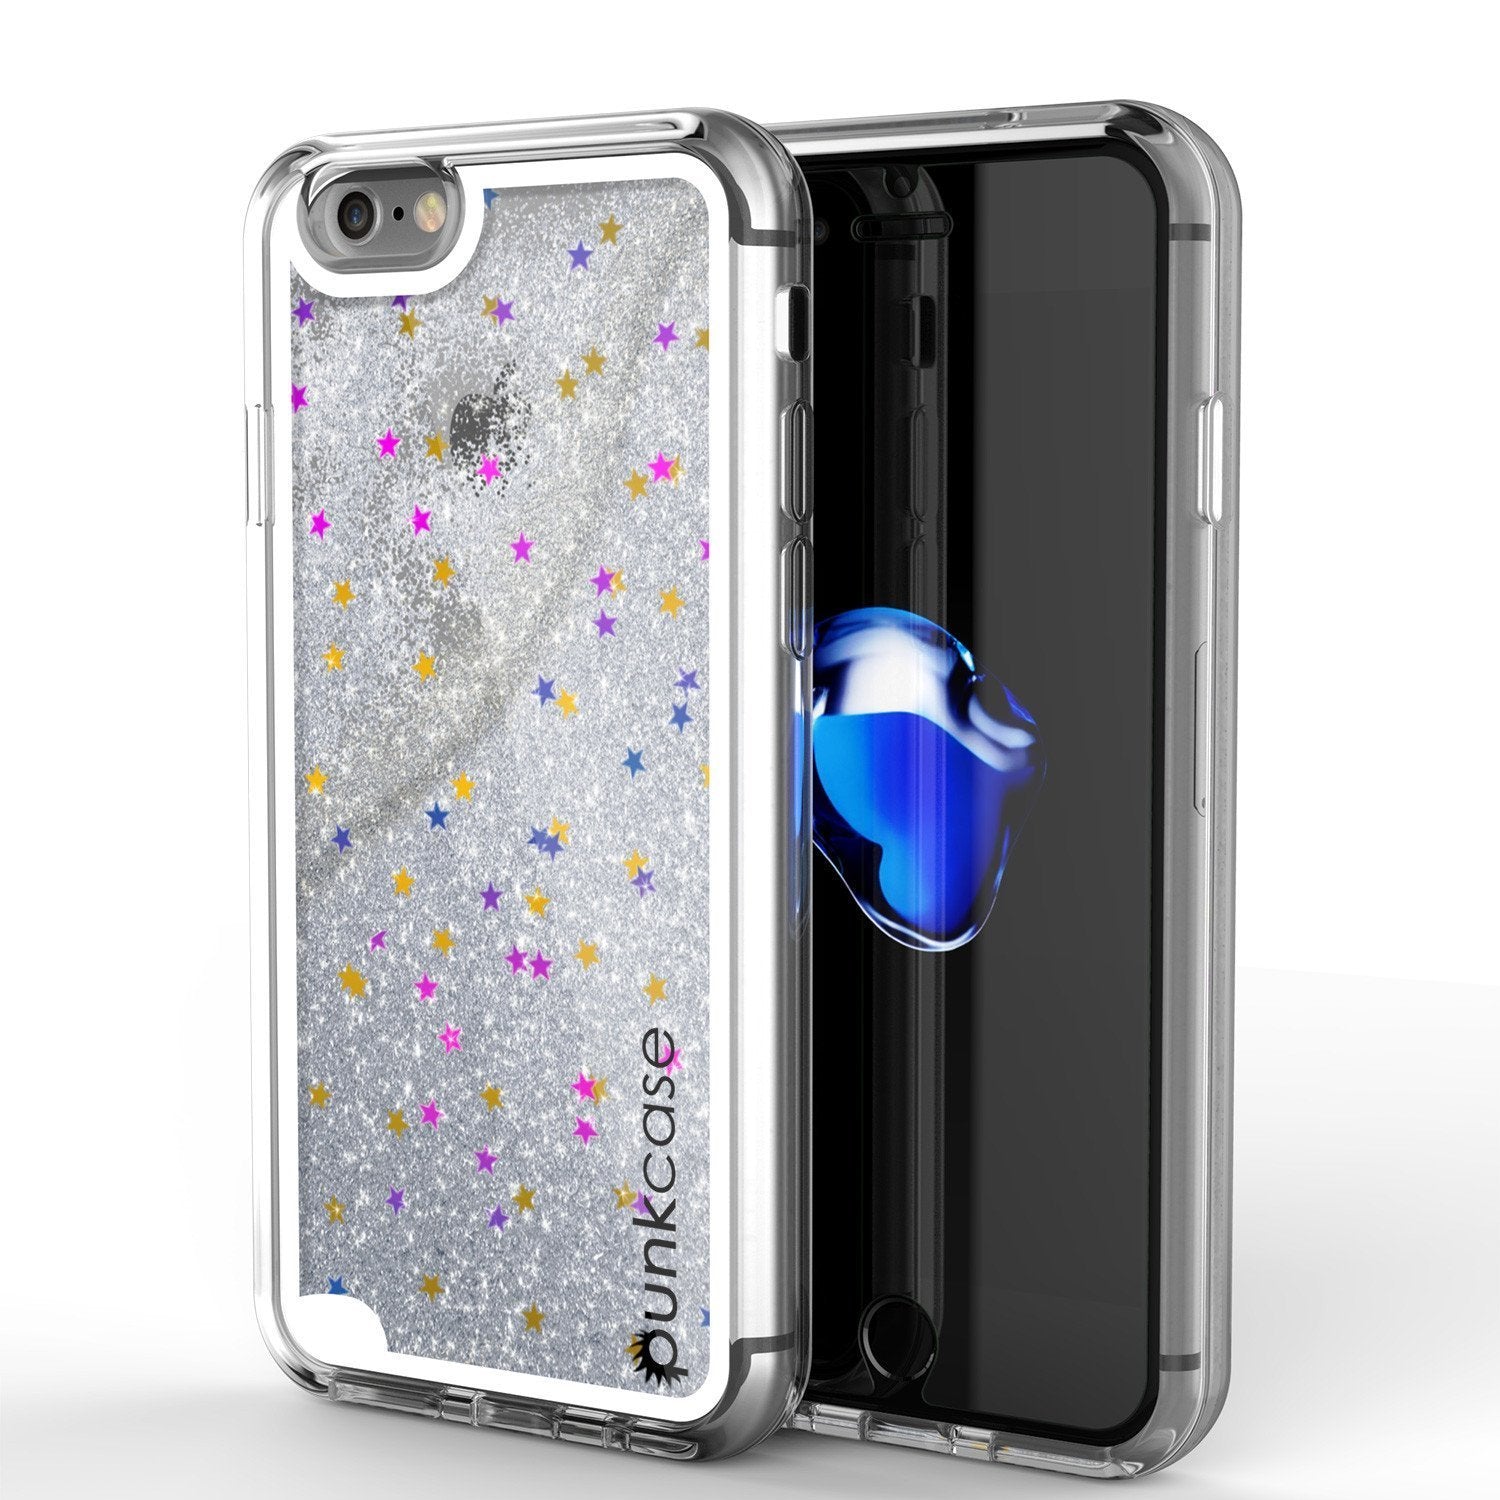 iPhone 8 Case PunkCase Liquid Silver, Floating Glitter Cover Series